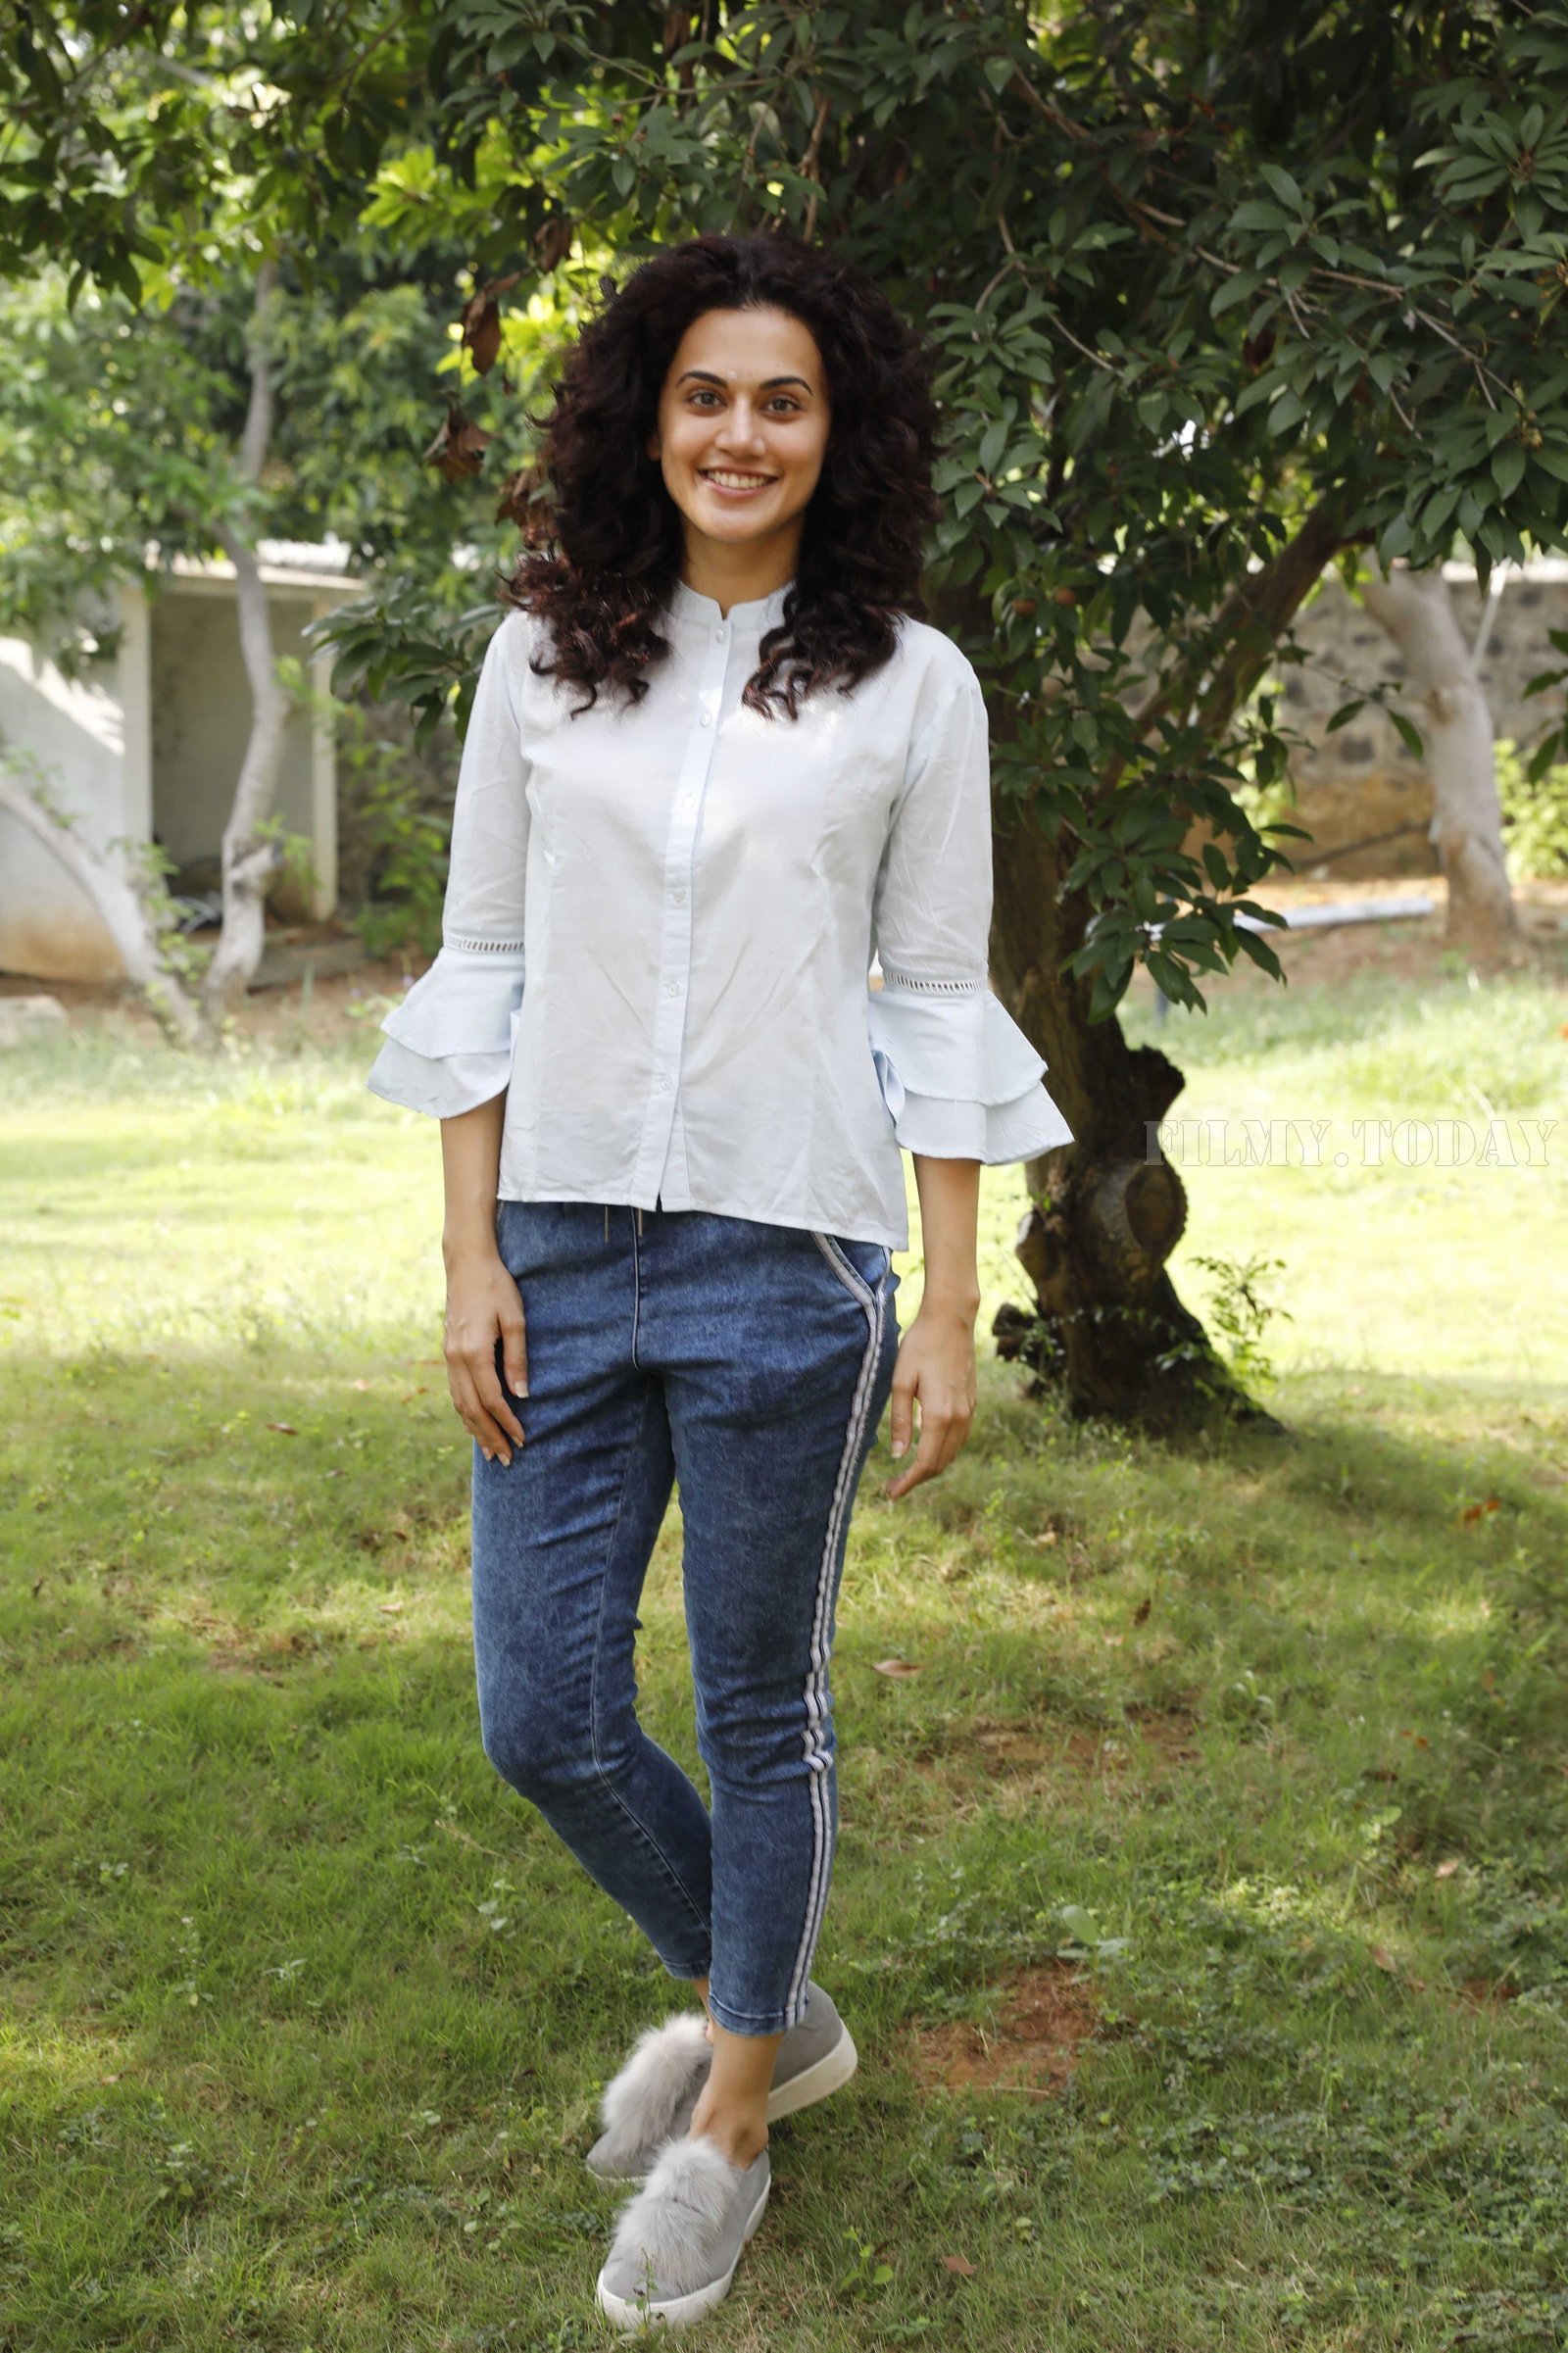 Taapsee Pannu - Game Over Telugu Film Movie Launch Photos | Picture 1604173